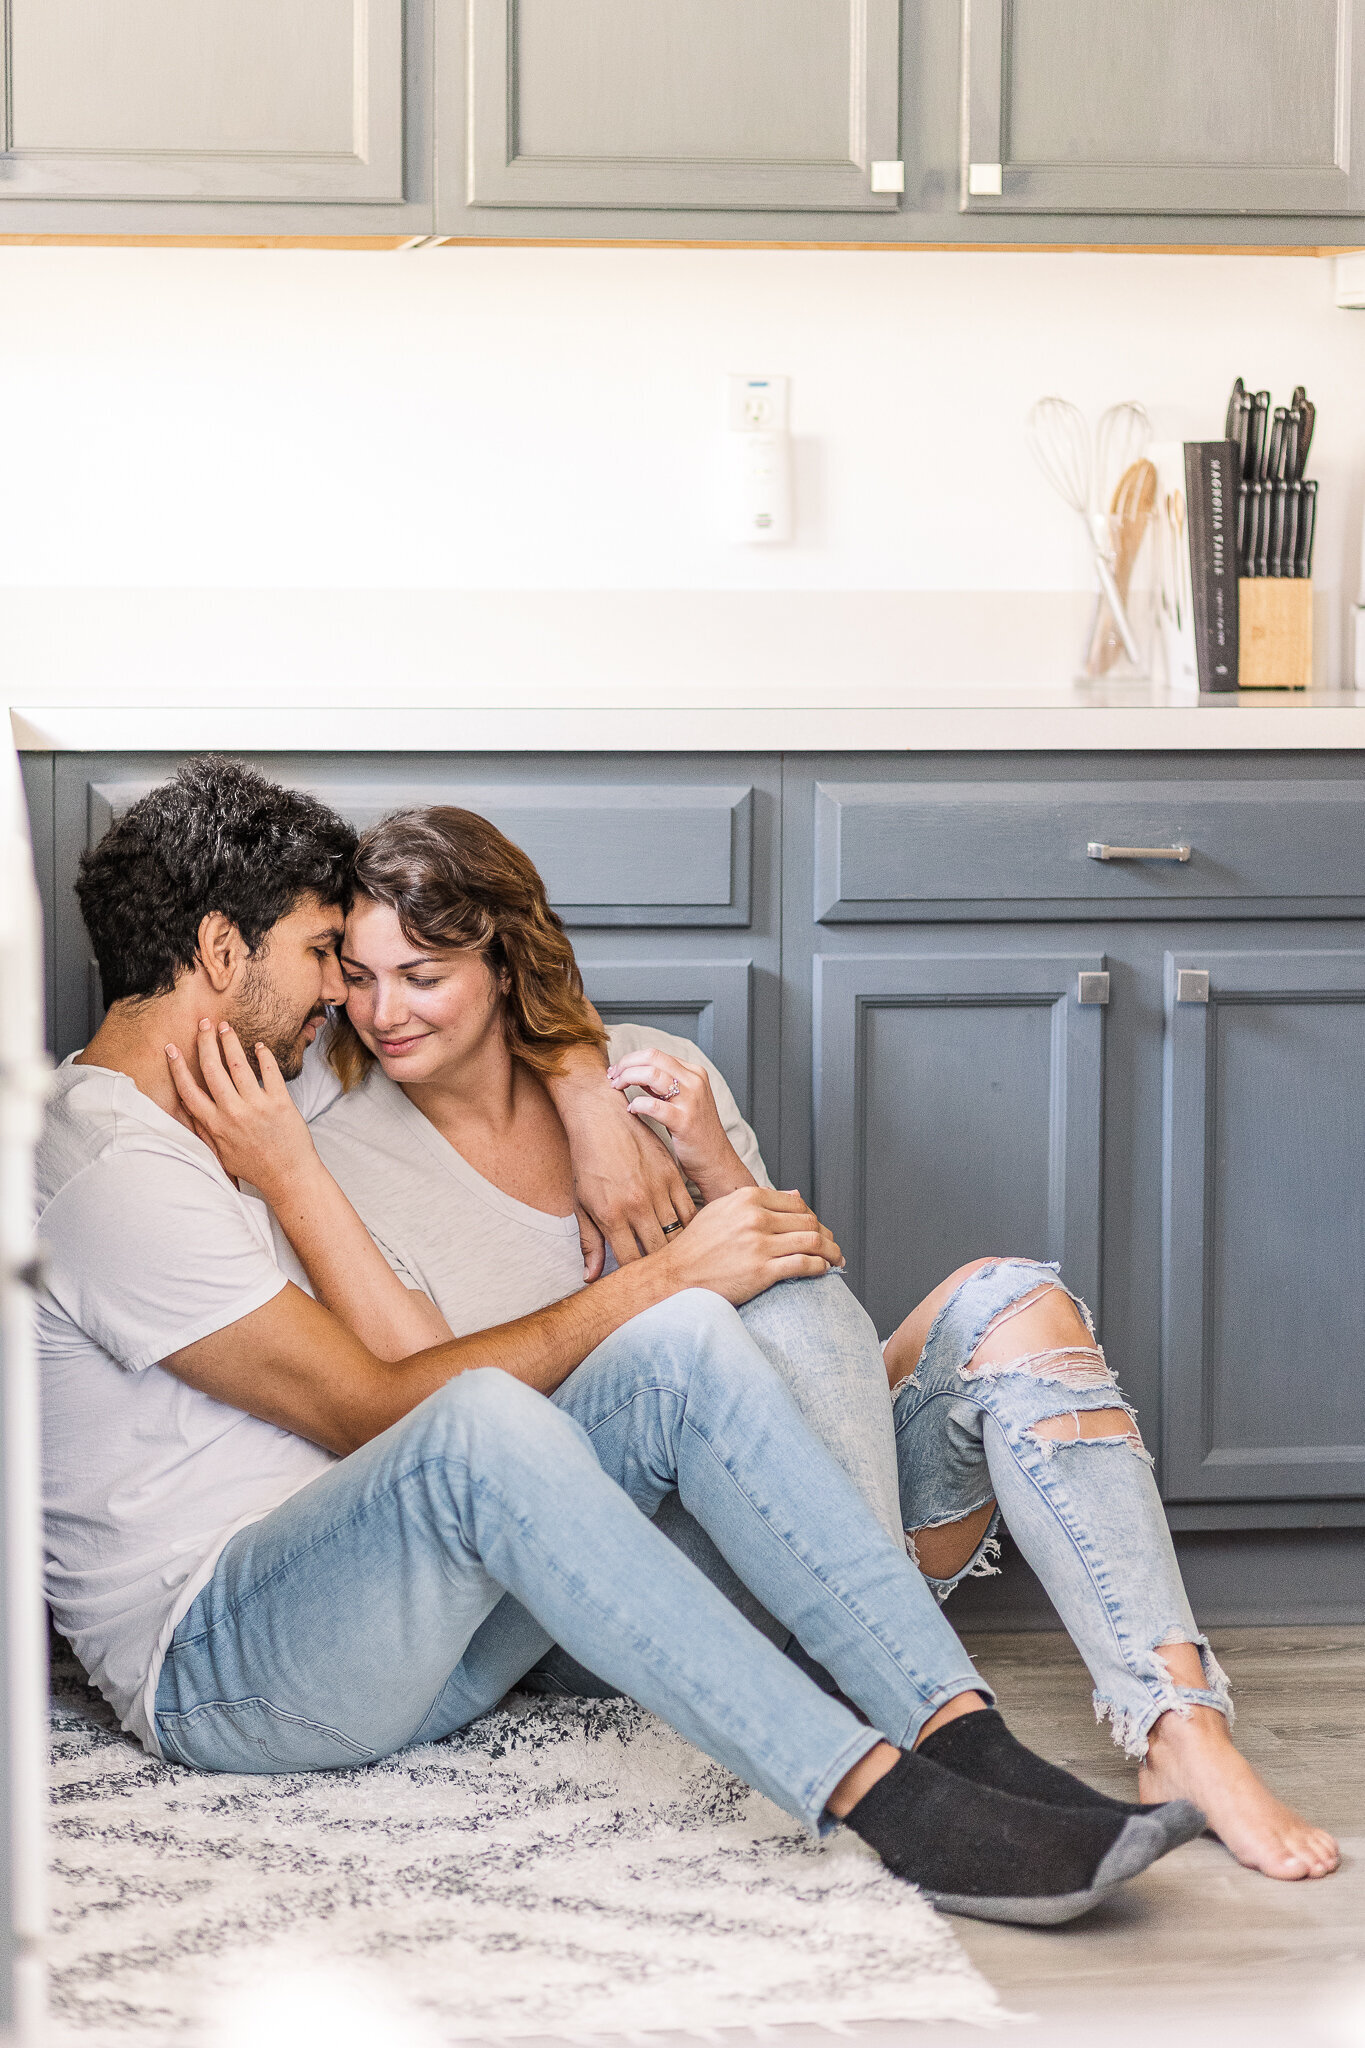 A man and woman sit on a kitchen floor snuggled up